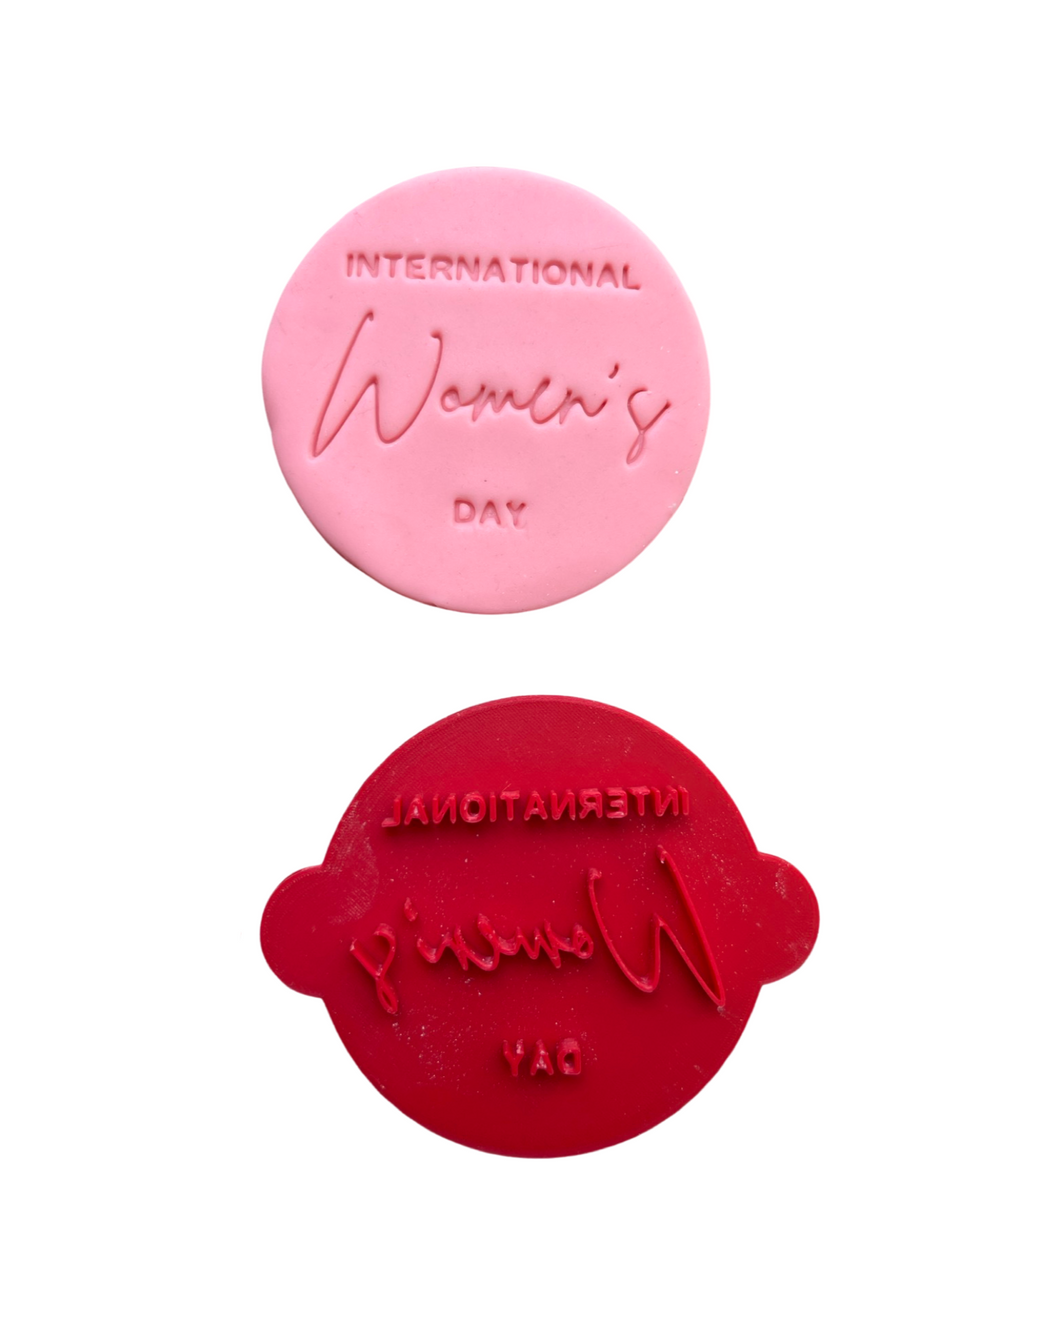 International women's day cookie stamp embrace equity